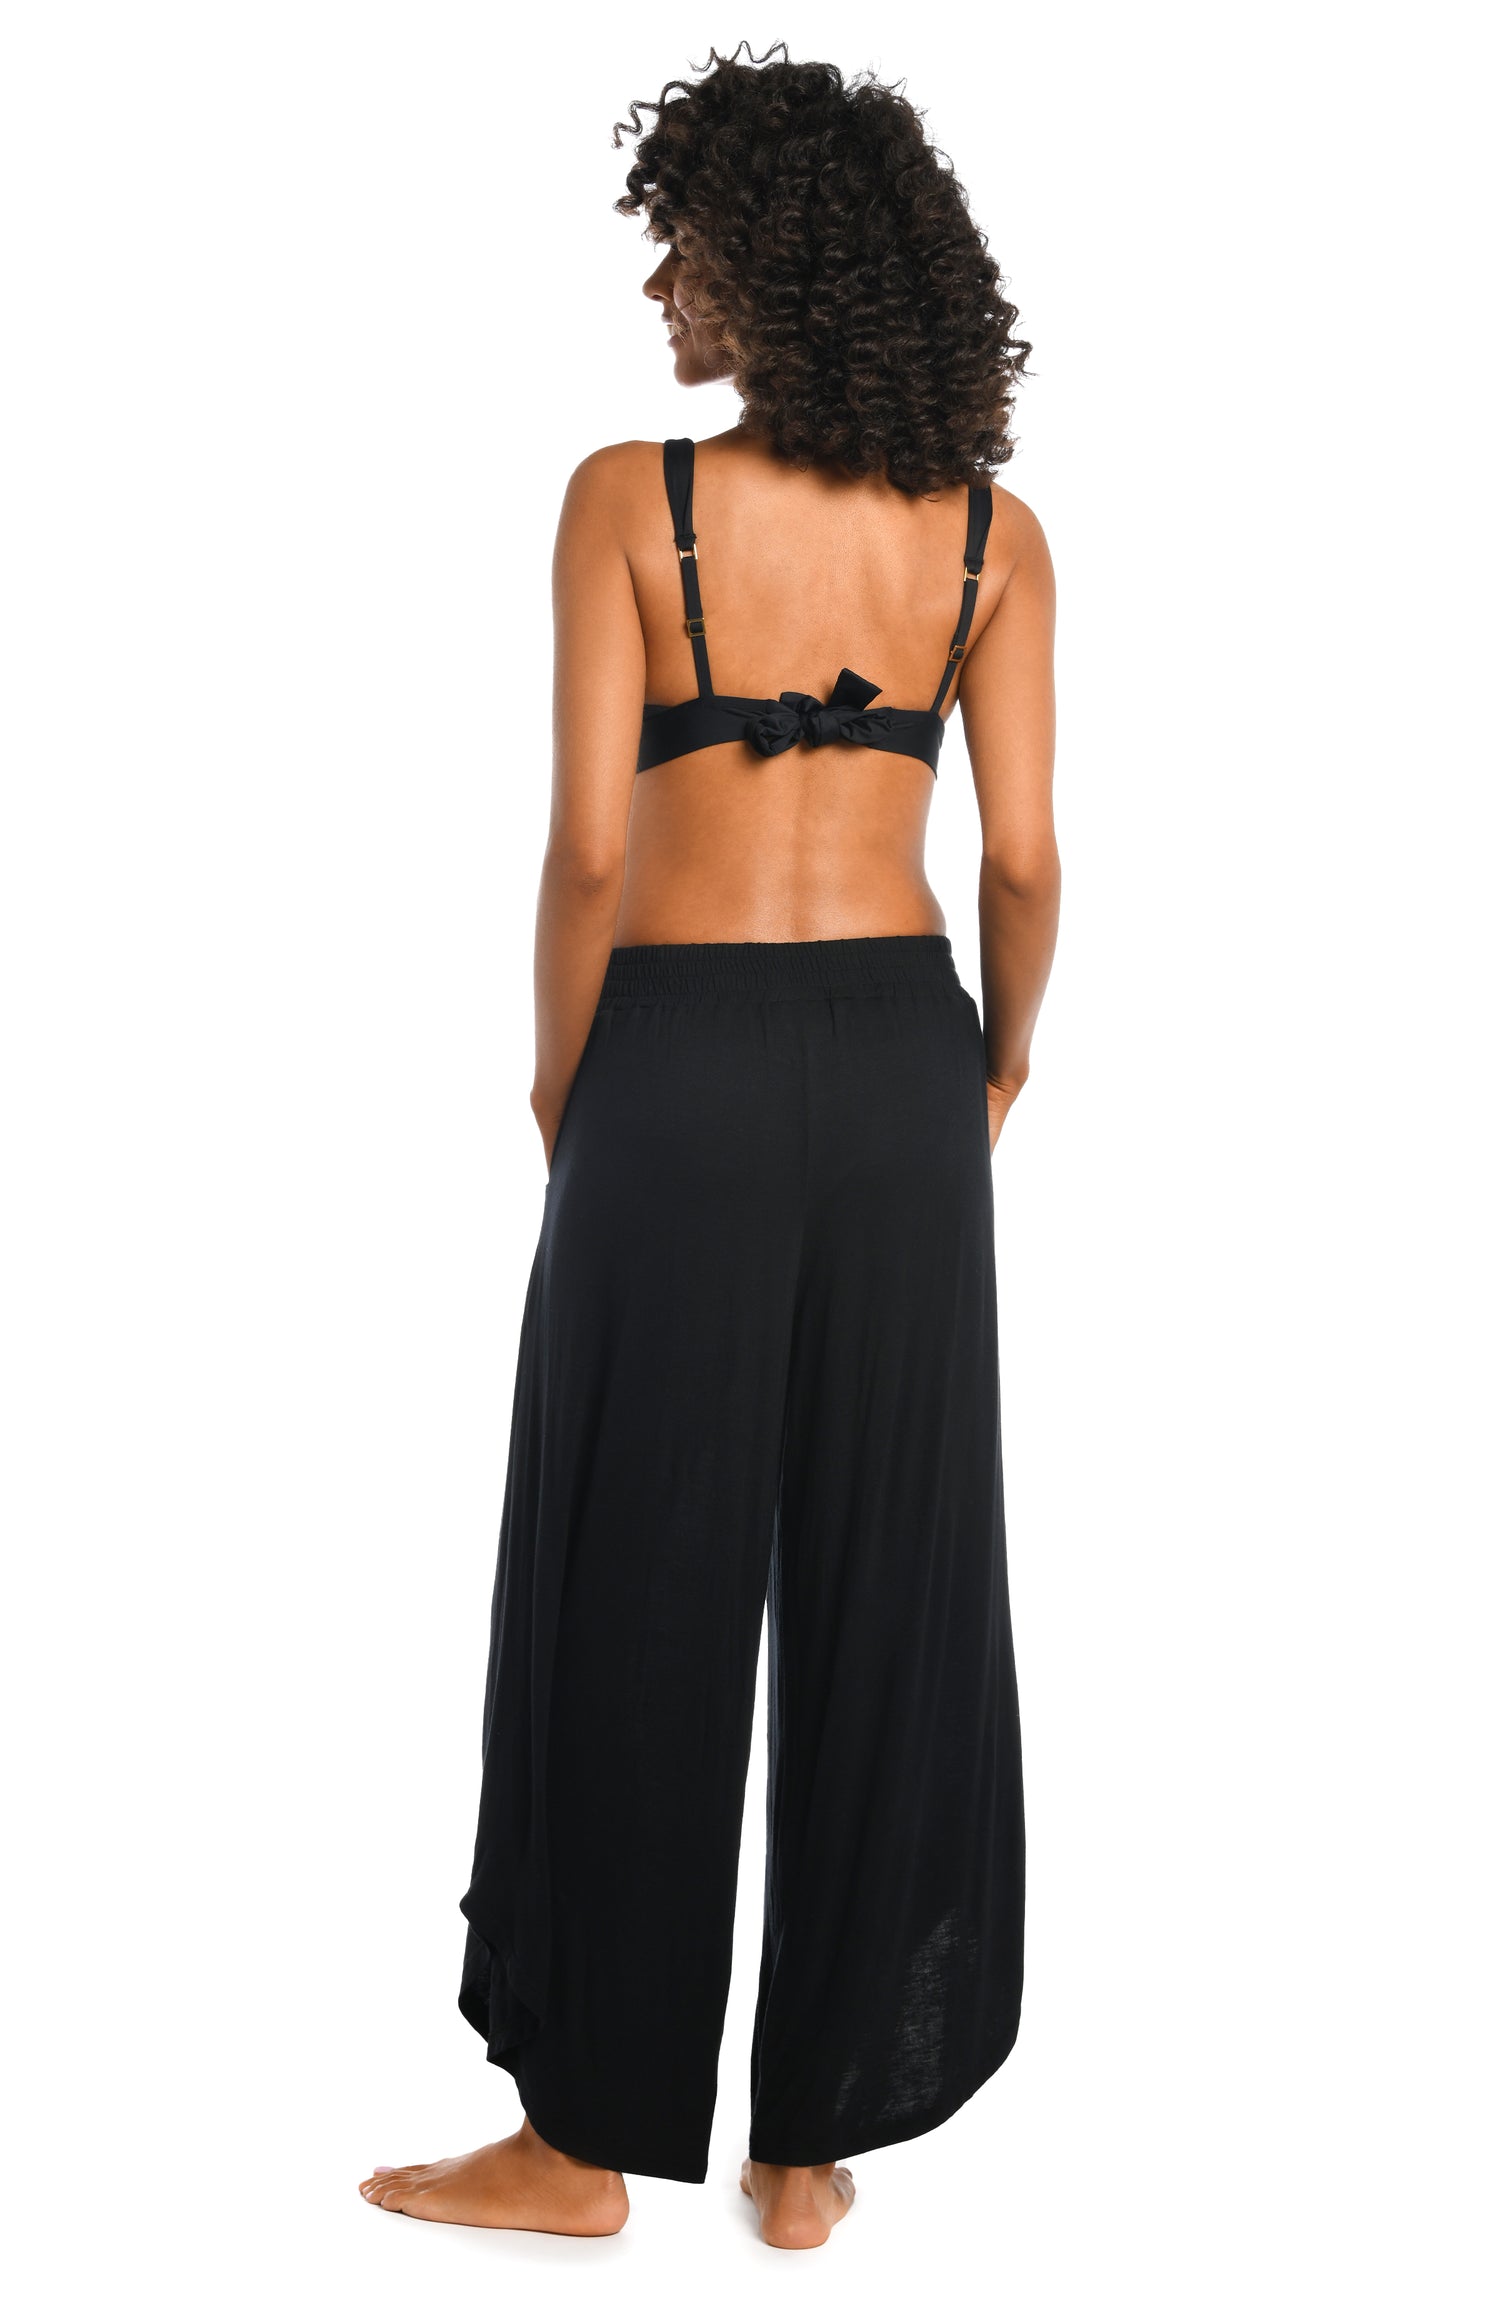 Model is wearing a black palazzo pant swimsuit cover up from our Draped Darling collection.